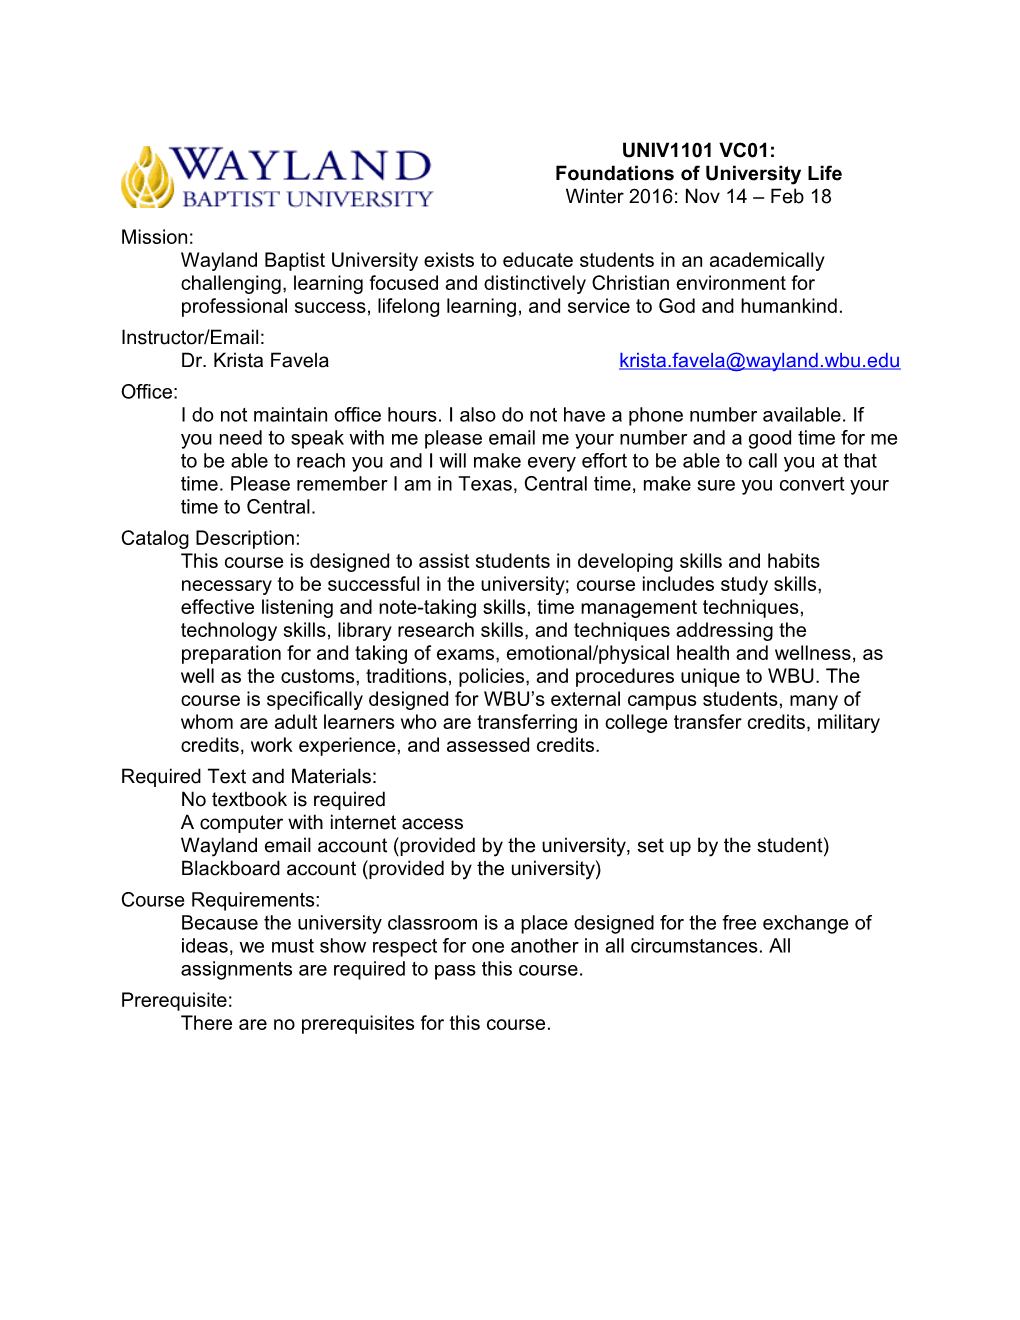 Mission: Wayland Baptist University Exists to Educate Students in an Academically Challenging